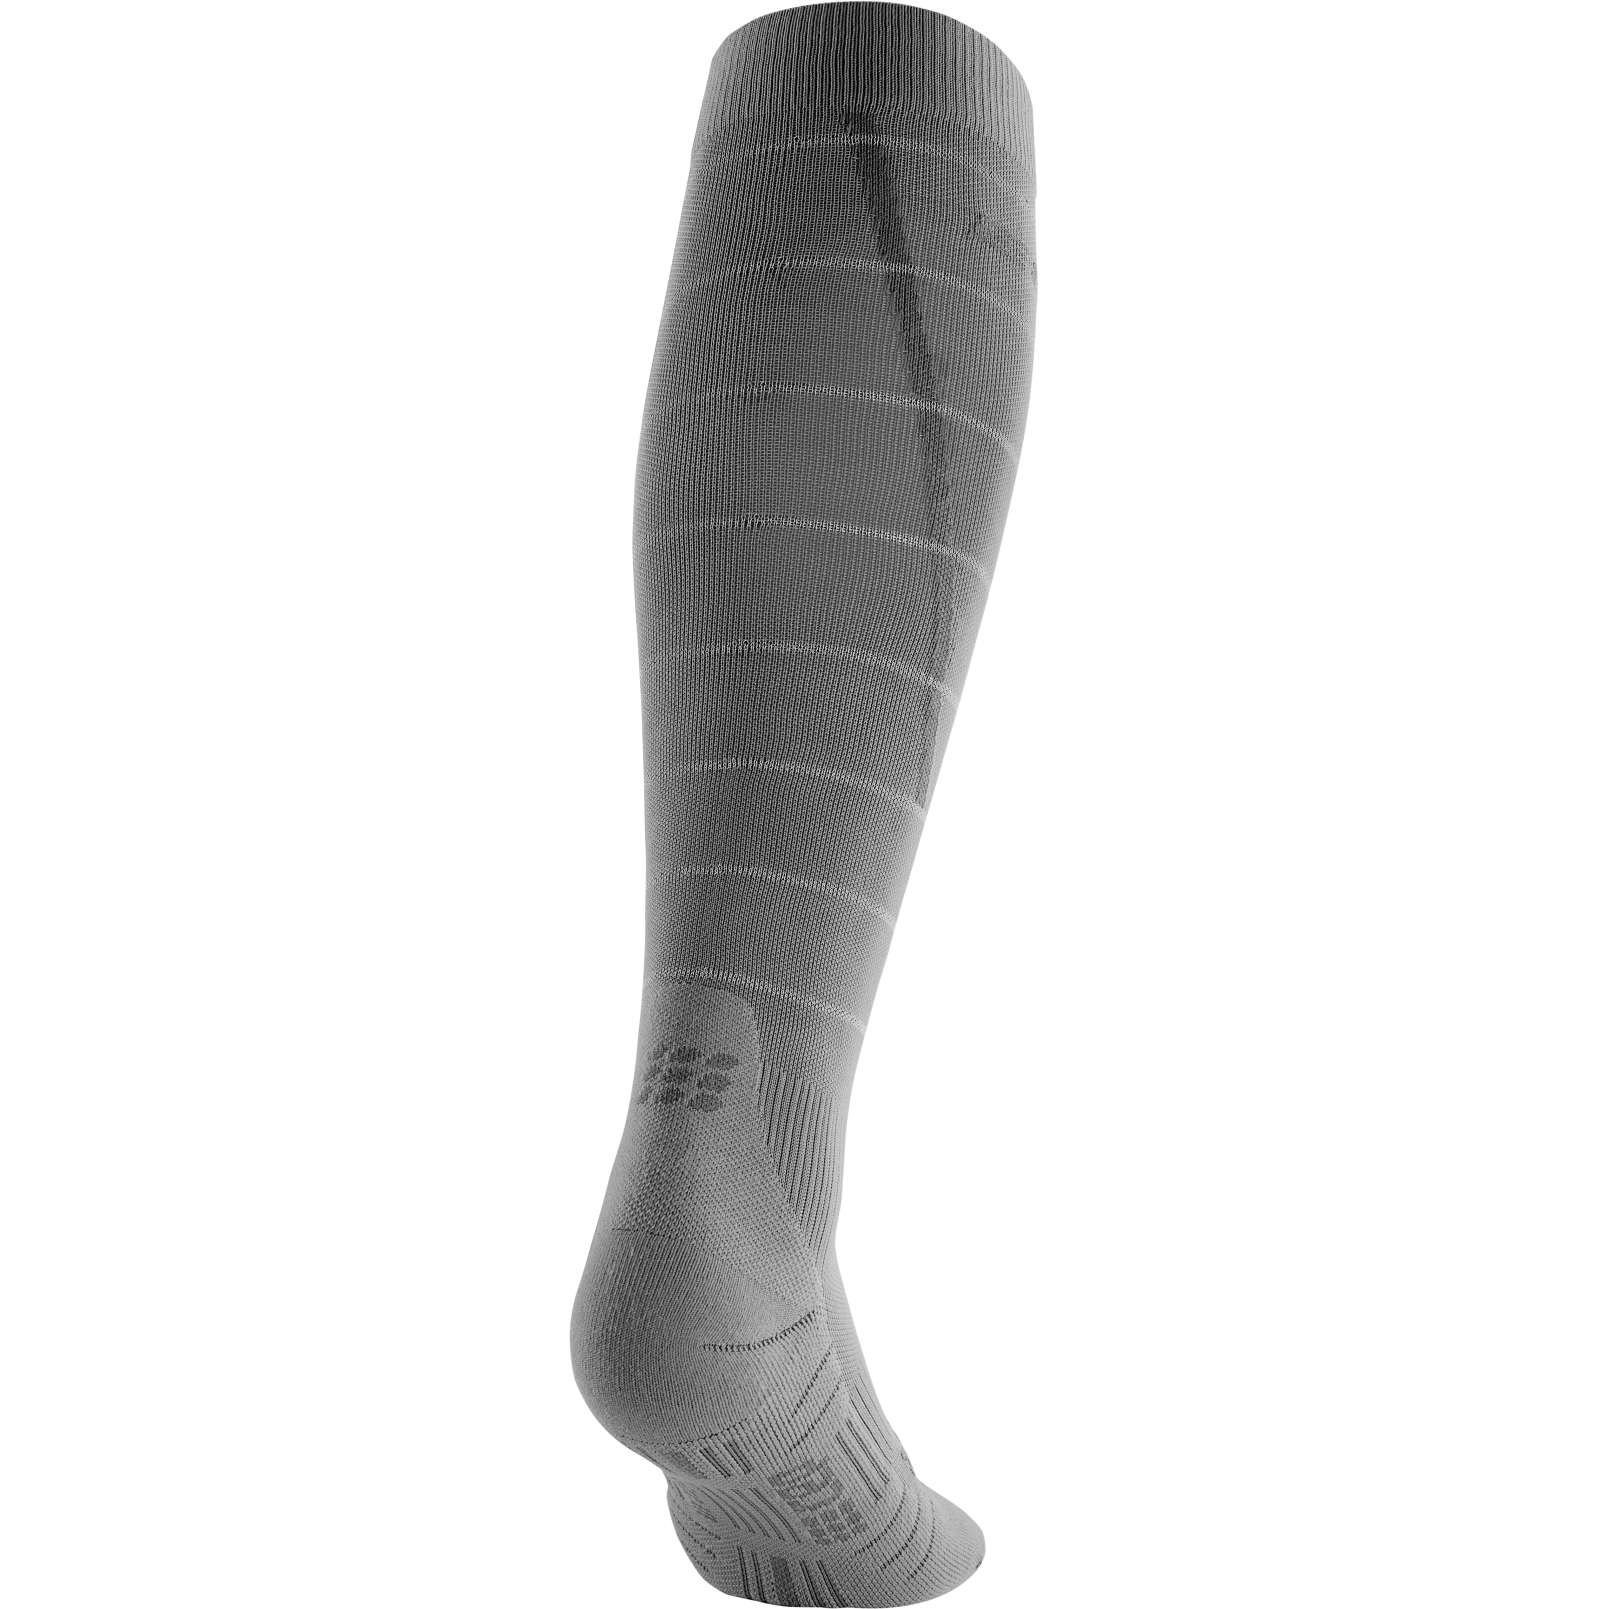 CEP I Be active, be reflective - Reflective Compression Socks